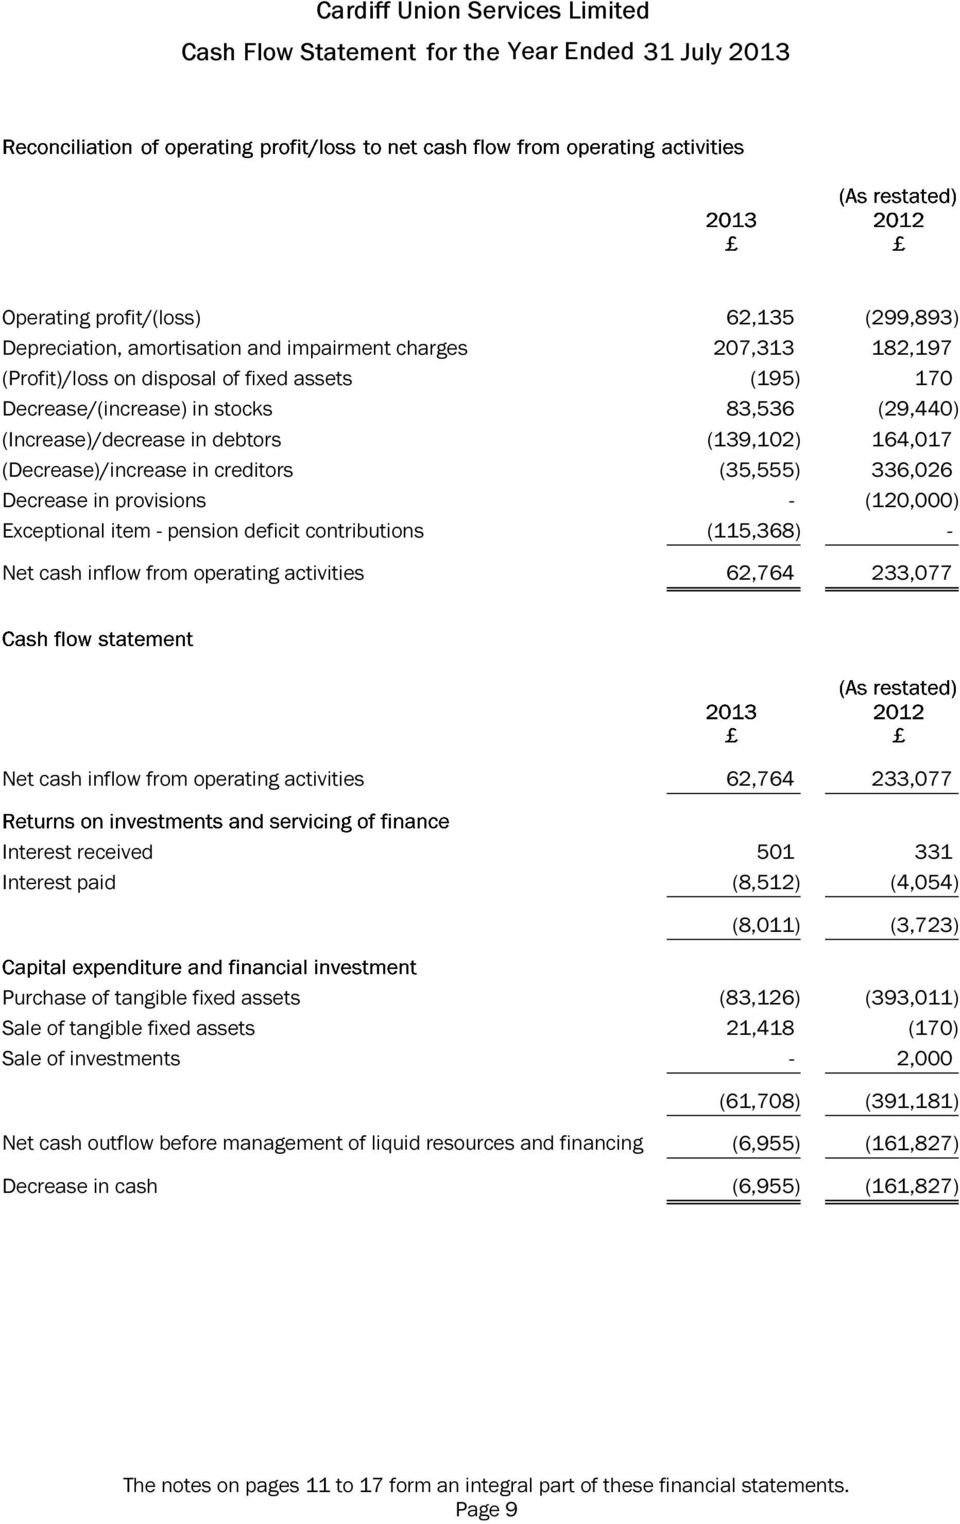 Exceptional item - pension deficit contributions (115,368) - Net cash inflow from operating activities 62,764 233,077 Net cash inflow from operating activities 62,764 233,077 Interest received 501